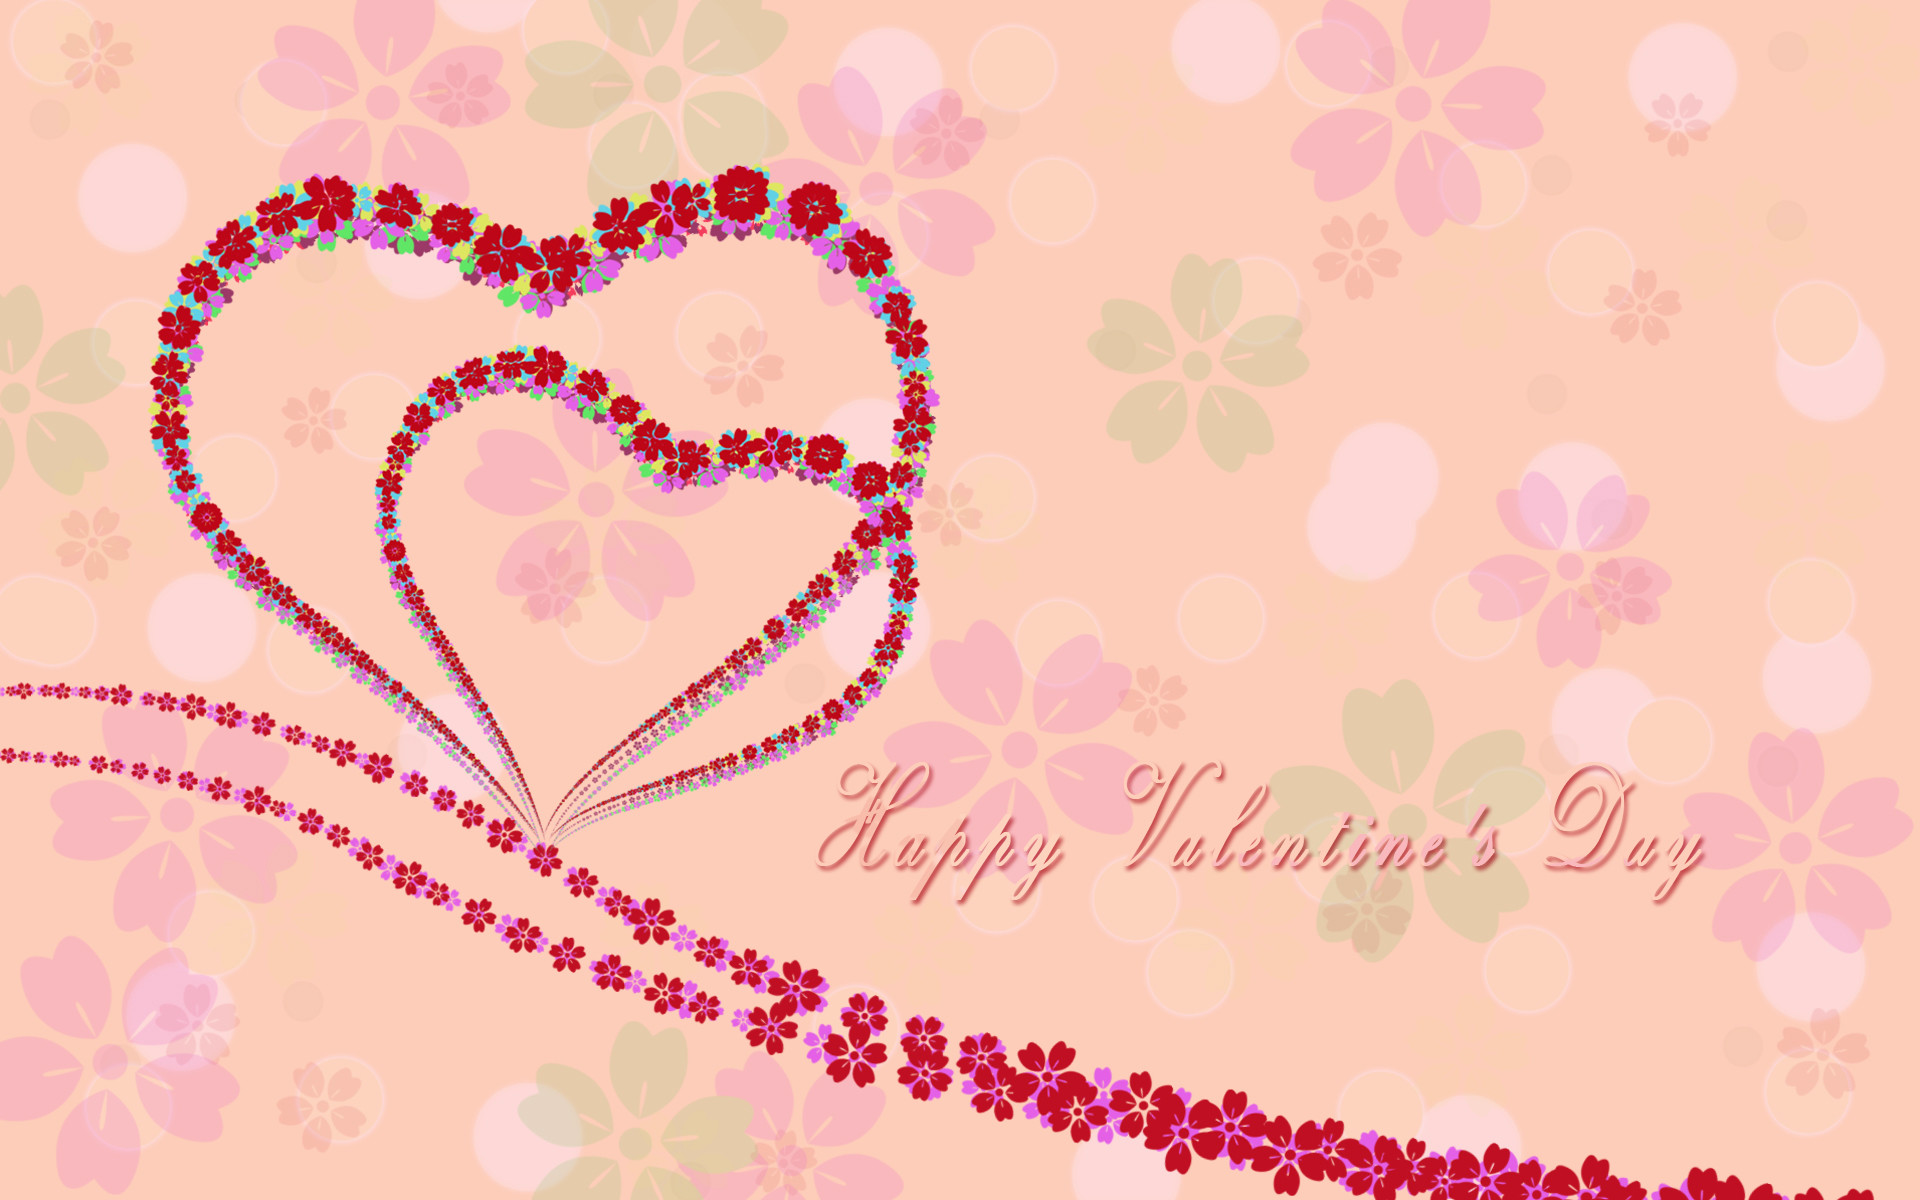 1920x1200 3d abstract wide happy valentines day image Wallpaper